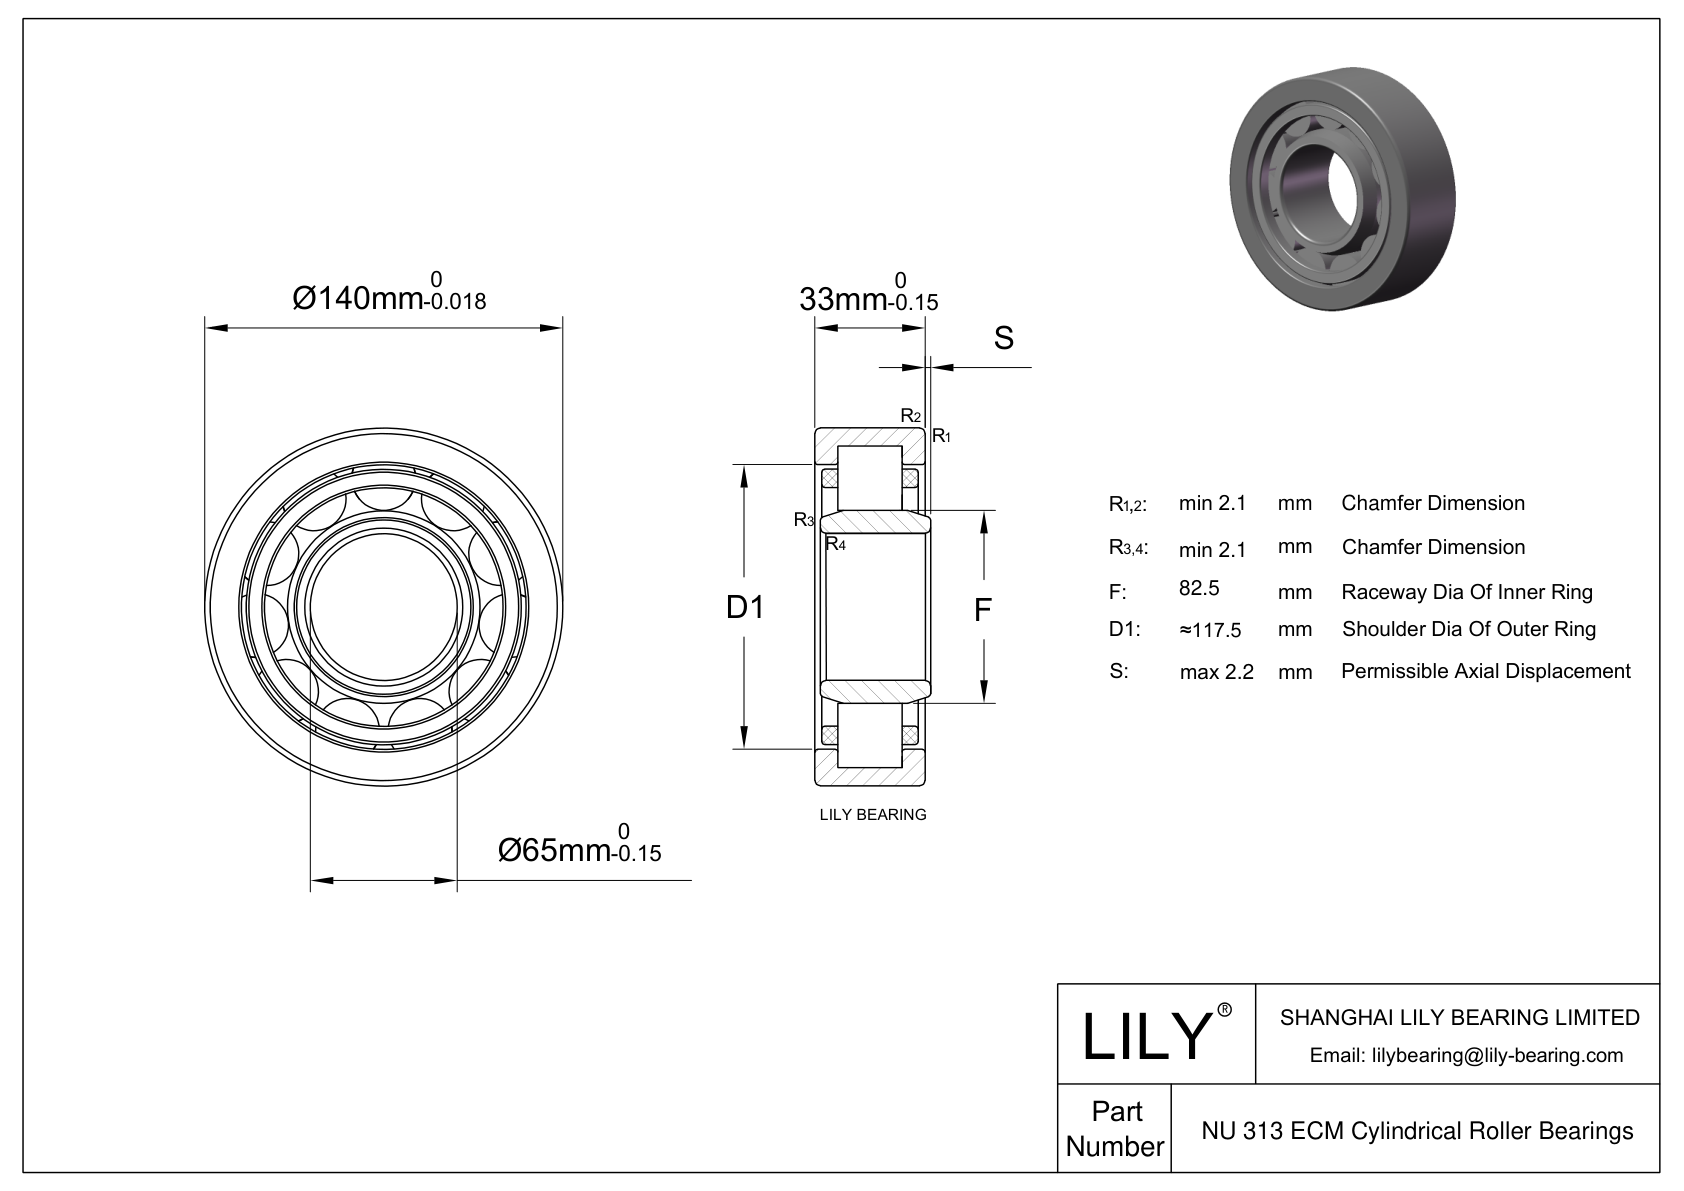 NU 313 ECM/C3VL0241 Ceramic Coated Cylindrical Roller Bearings cad drawing